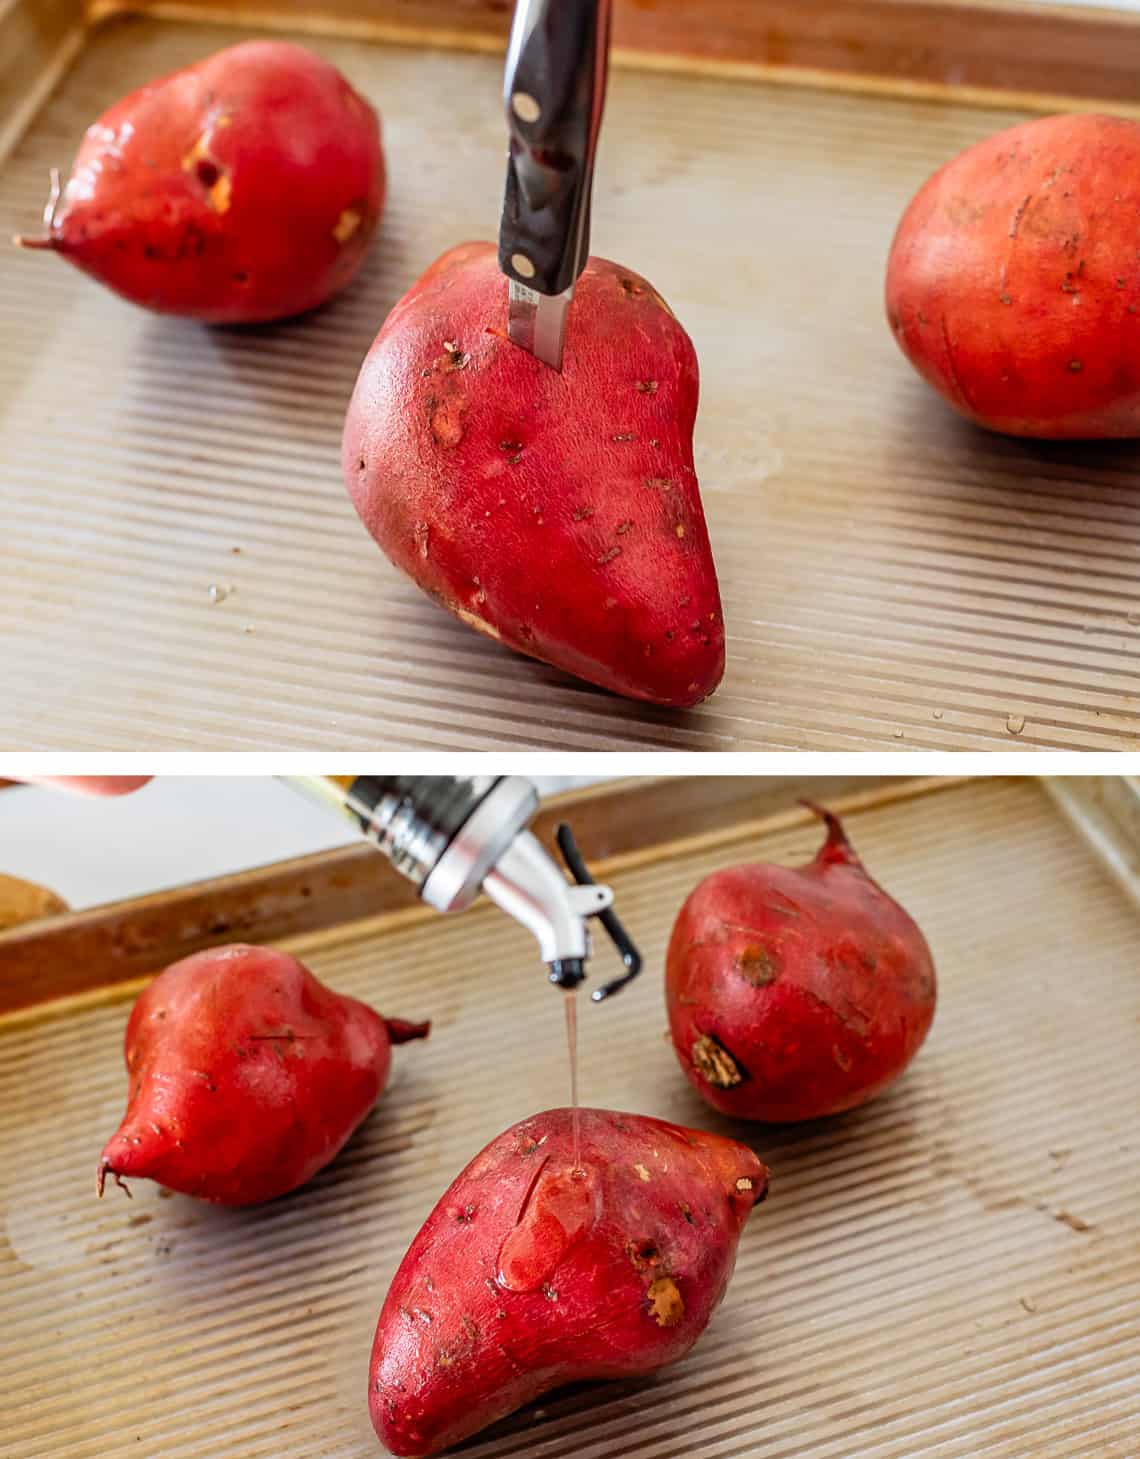 top piercing a sweet potato with a knife on a baking sheet, bottom drizzling oil over the top.